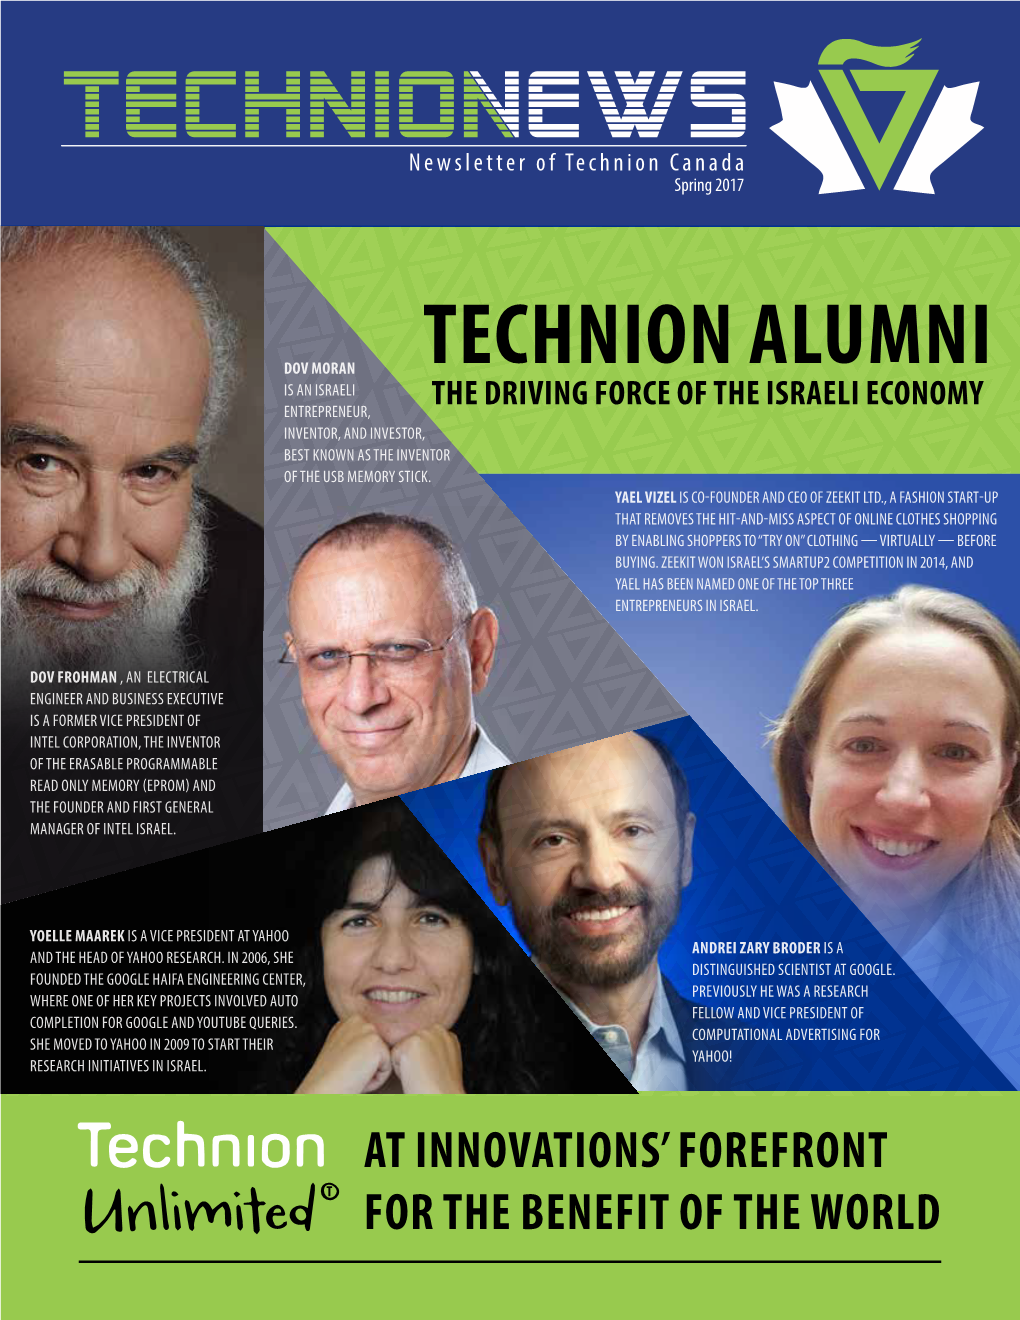 Technion Alumni Is an Israeli Entrepreneur, the Driving Force of the Israeli Economy Inventor, and Investor, Best Known As the Inventor of the USB Memory Stick